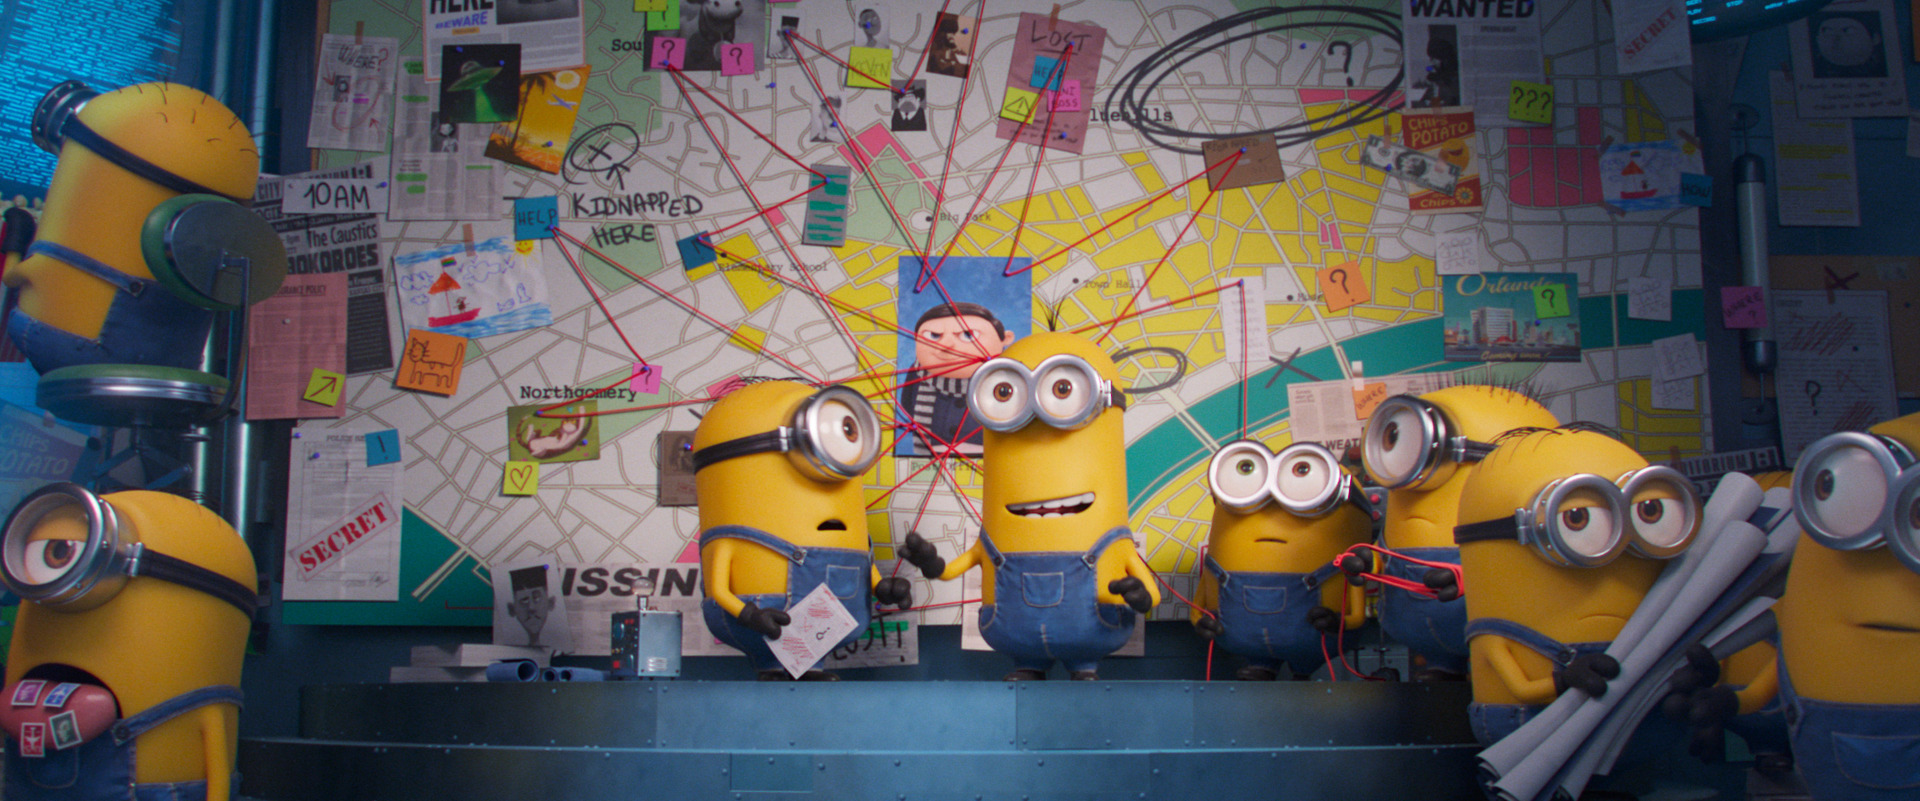 the minions standing in front of a conspiracy board